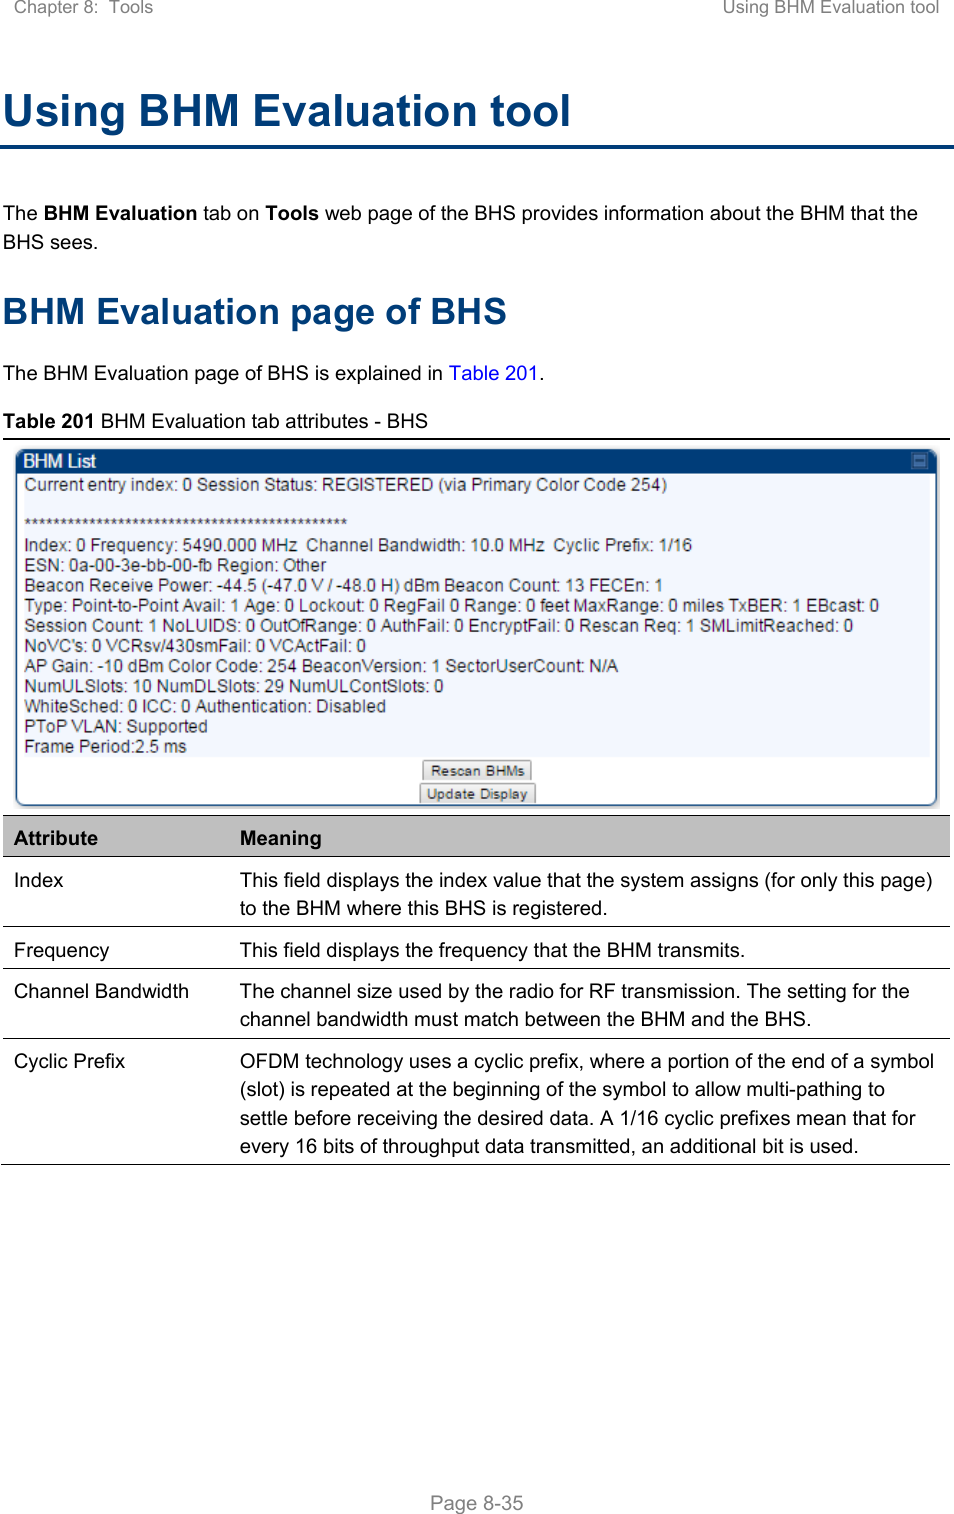 Chapter 8:  Tools  Using BHM Evaluation tool   Page 8-35 Using BHM Evaluation tool The BHM Evaluation tab on Tools web page of the BHS provides information about the BHM that the BHS sees. BHM Evaluation page of BHS The BHM Evaluation page of BHS is explained in Table 201. Table 201 BHM Evaluation tab attributes - BHS Attribute  Meaning Index  This field displays the index value that the system assigns (for only this page) to the BHM where this BHS is registered. Frequency  This field displays the frequency that the BHM transmits. Channel Bandwidth  The channel size used by the radio for RF transmission. The setting for the channel bandwidth must match between the BHM and the BHS.  Cyclic Prefix  OFDM technology uses a cyclic prefix, where a portion of the end of a symbol (slot) is repeated at the beginning of the symbol to allow multi-pathing to settle before receiving the desired data. A 1/16 cyclic prefixes mean that for every 16 bits of throughput data transmitted, an additional bit is used. 